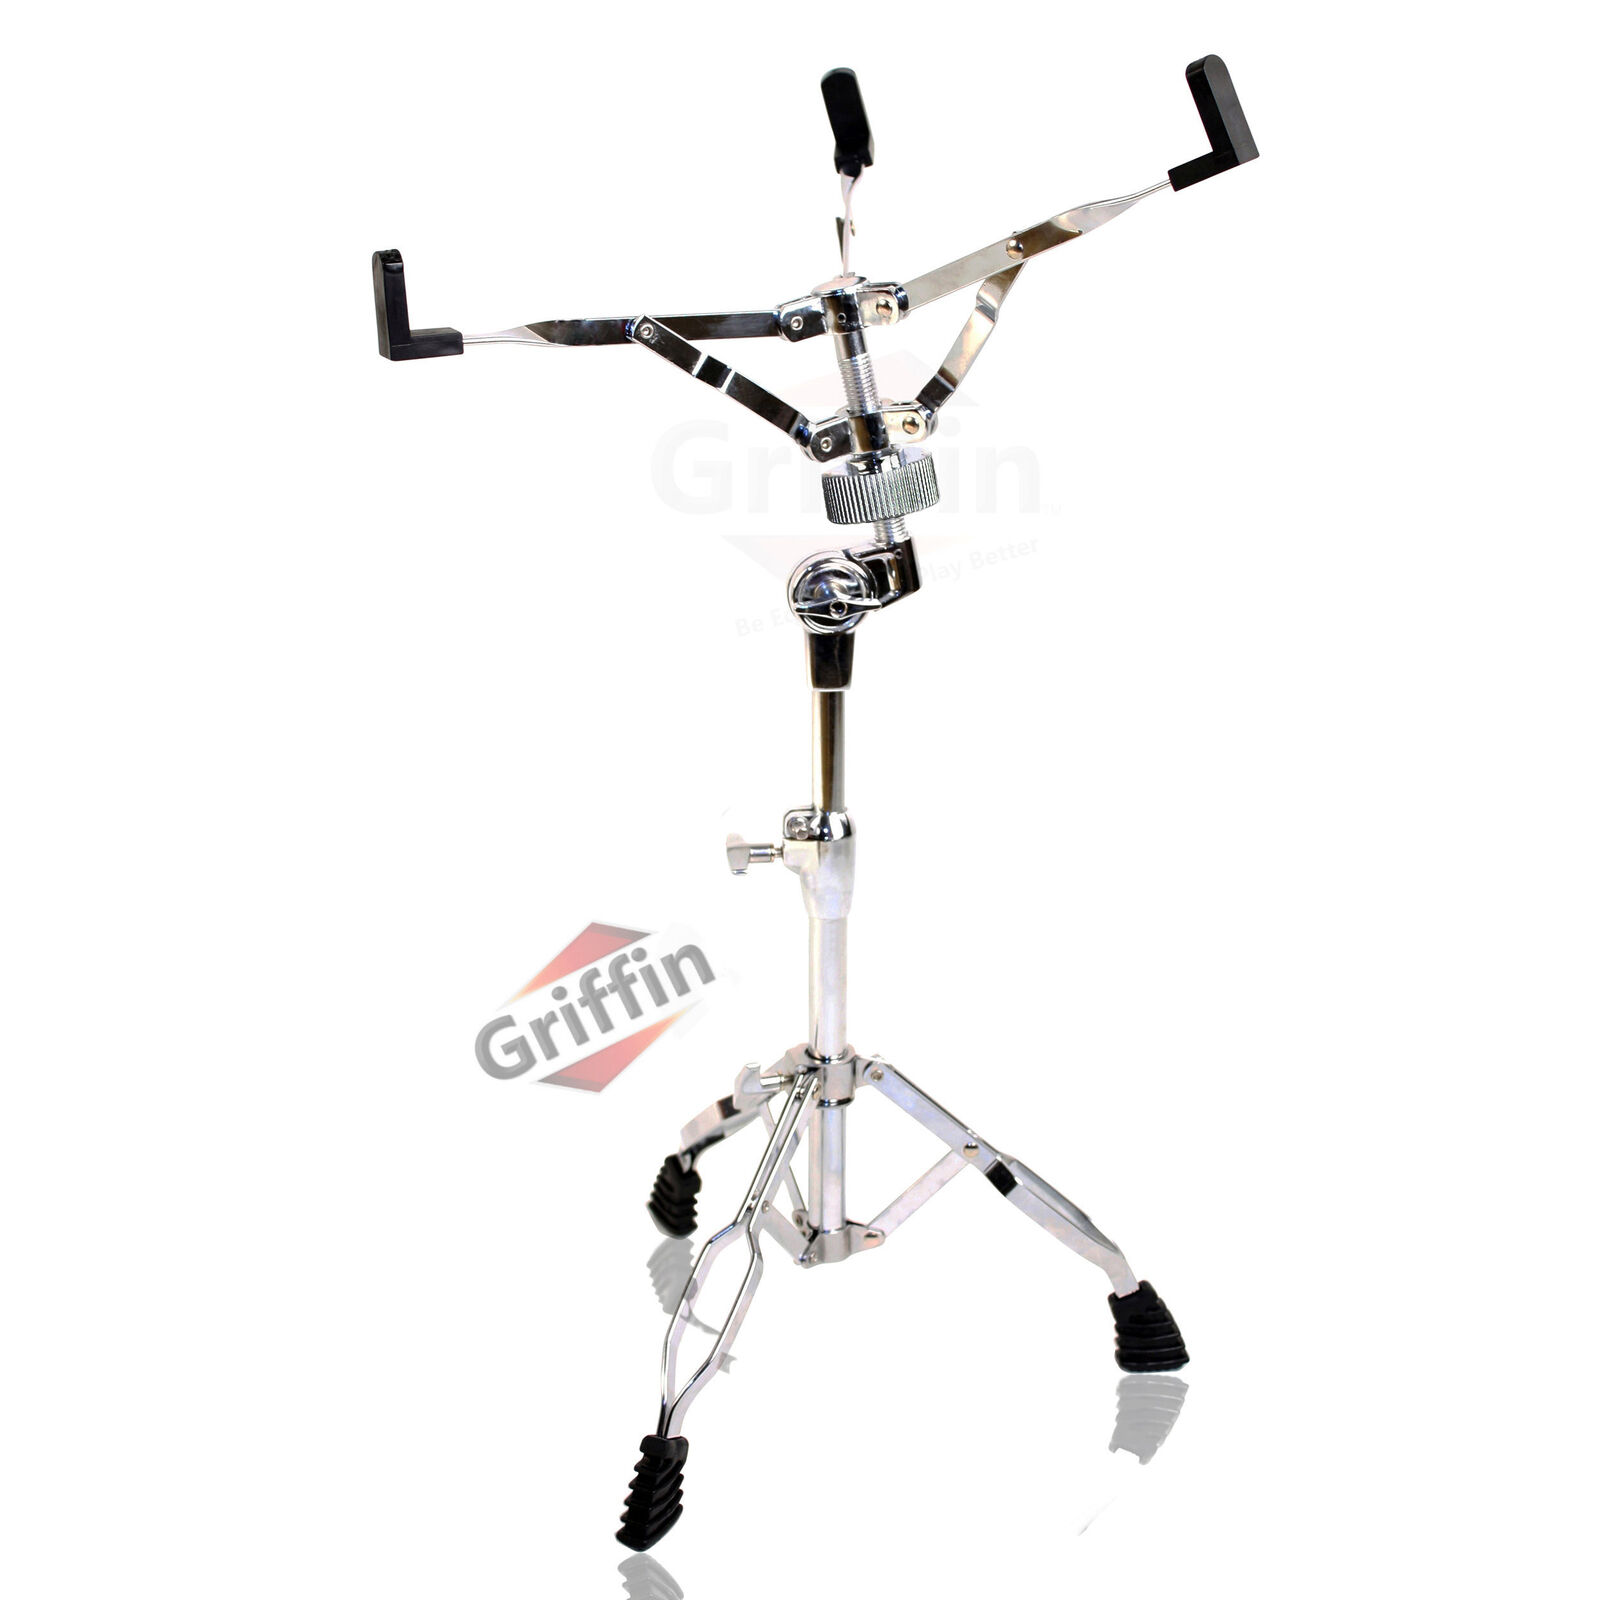 GRIFFIN Snare Drum Kit + Snare Stand, 2 Pairs Maple Wood Drum Sticks & Drum Key 2